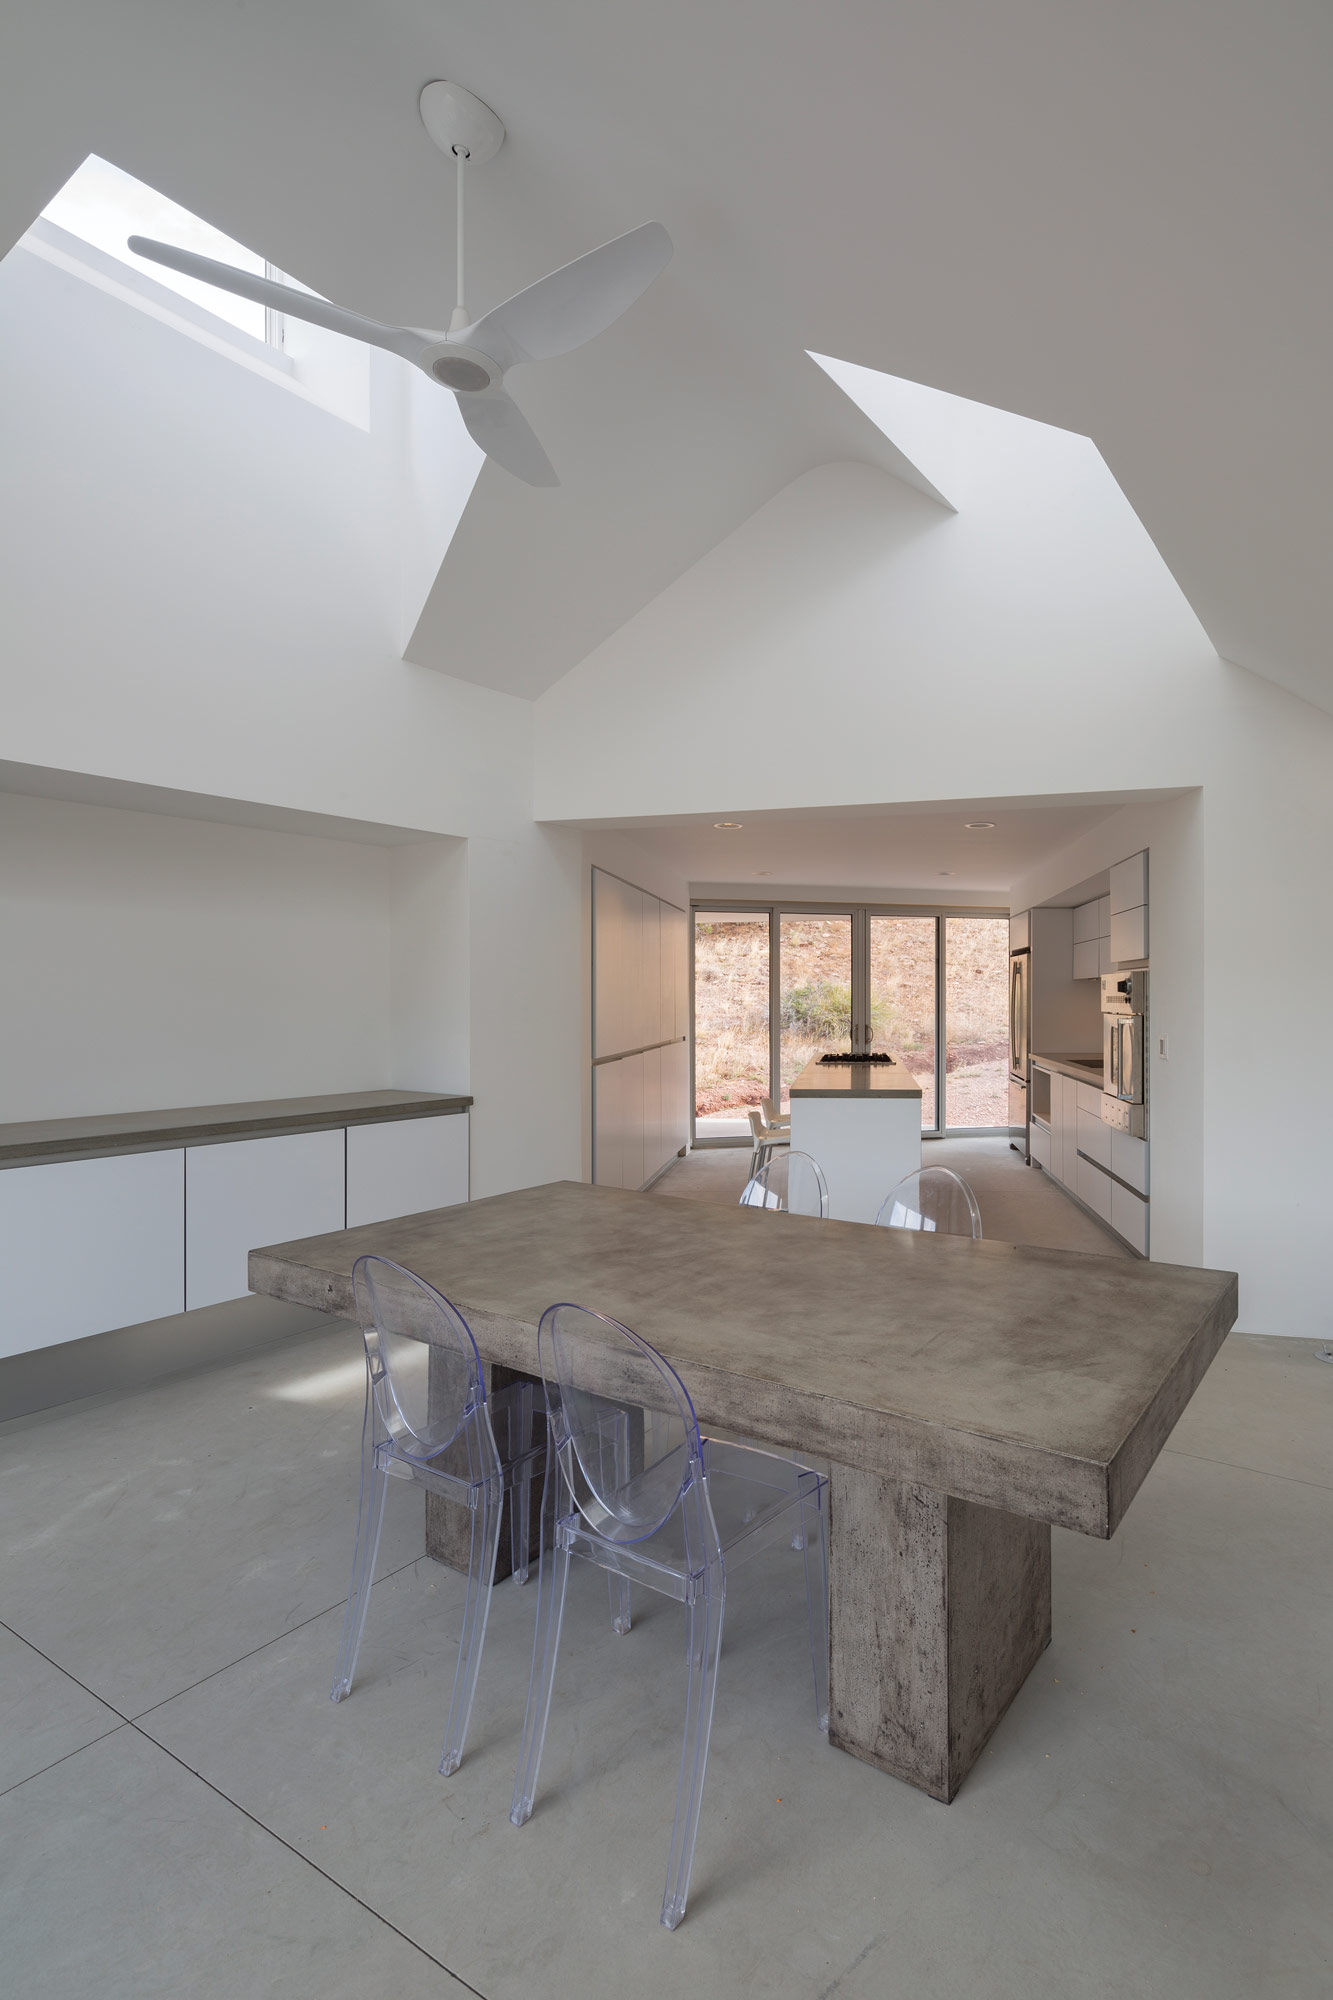 Solar chimneys dictate the interior spaces at the Element House. (Courtesy MOS Architects) 